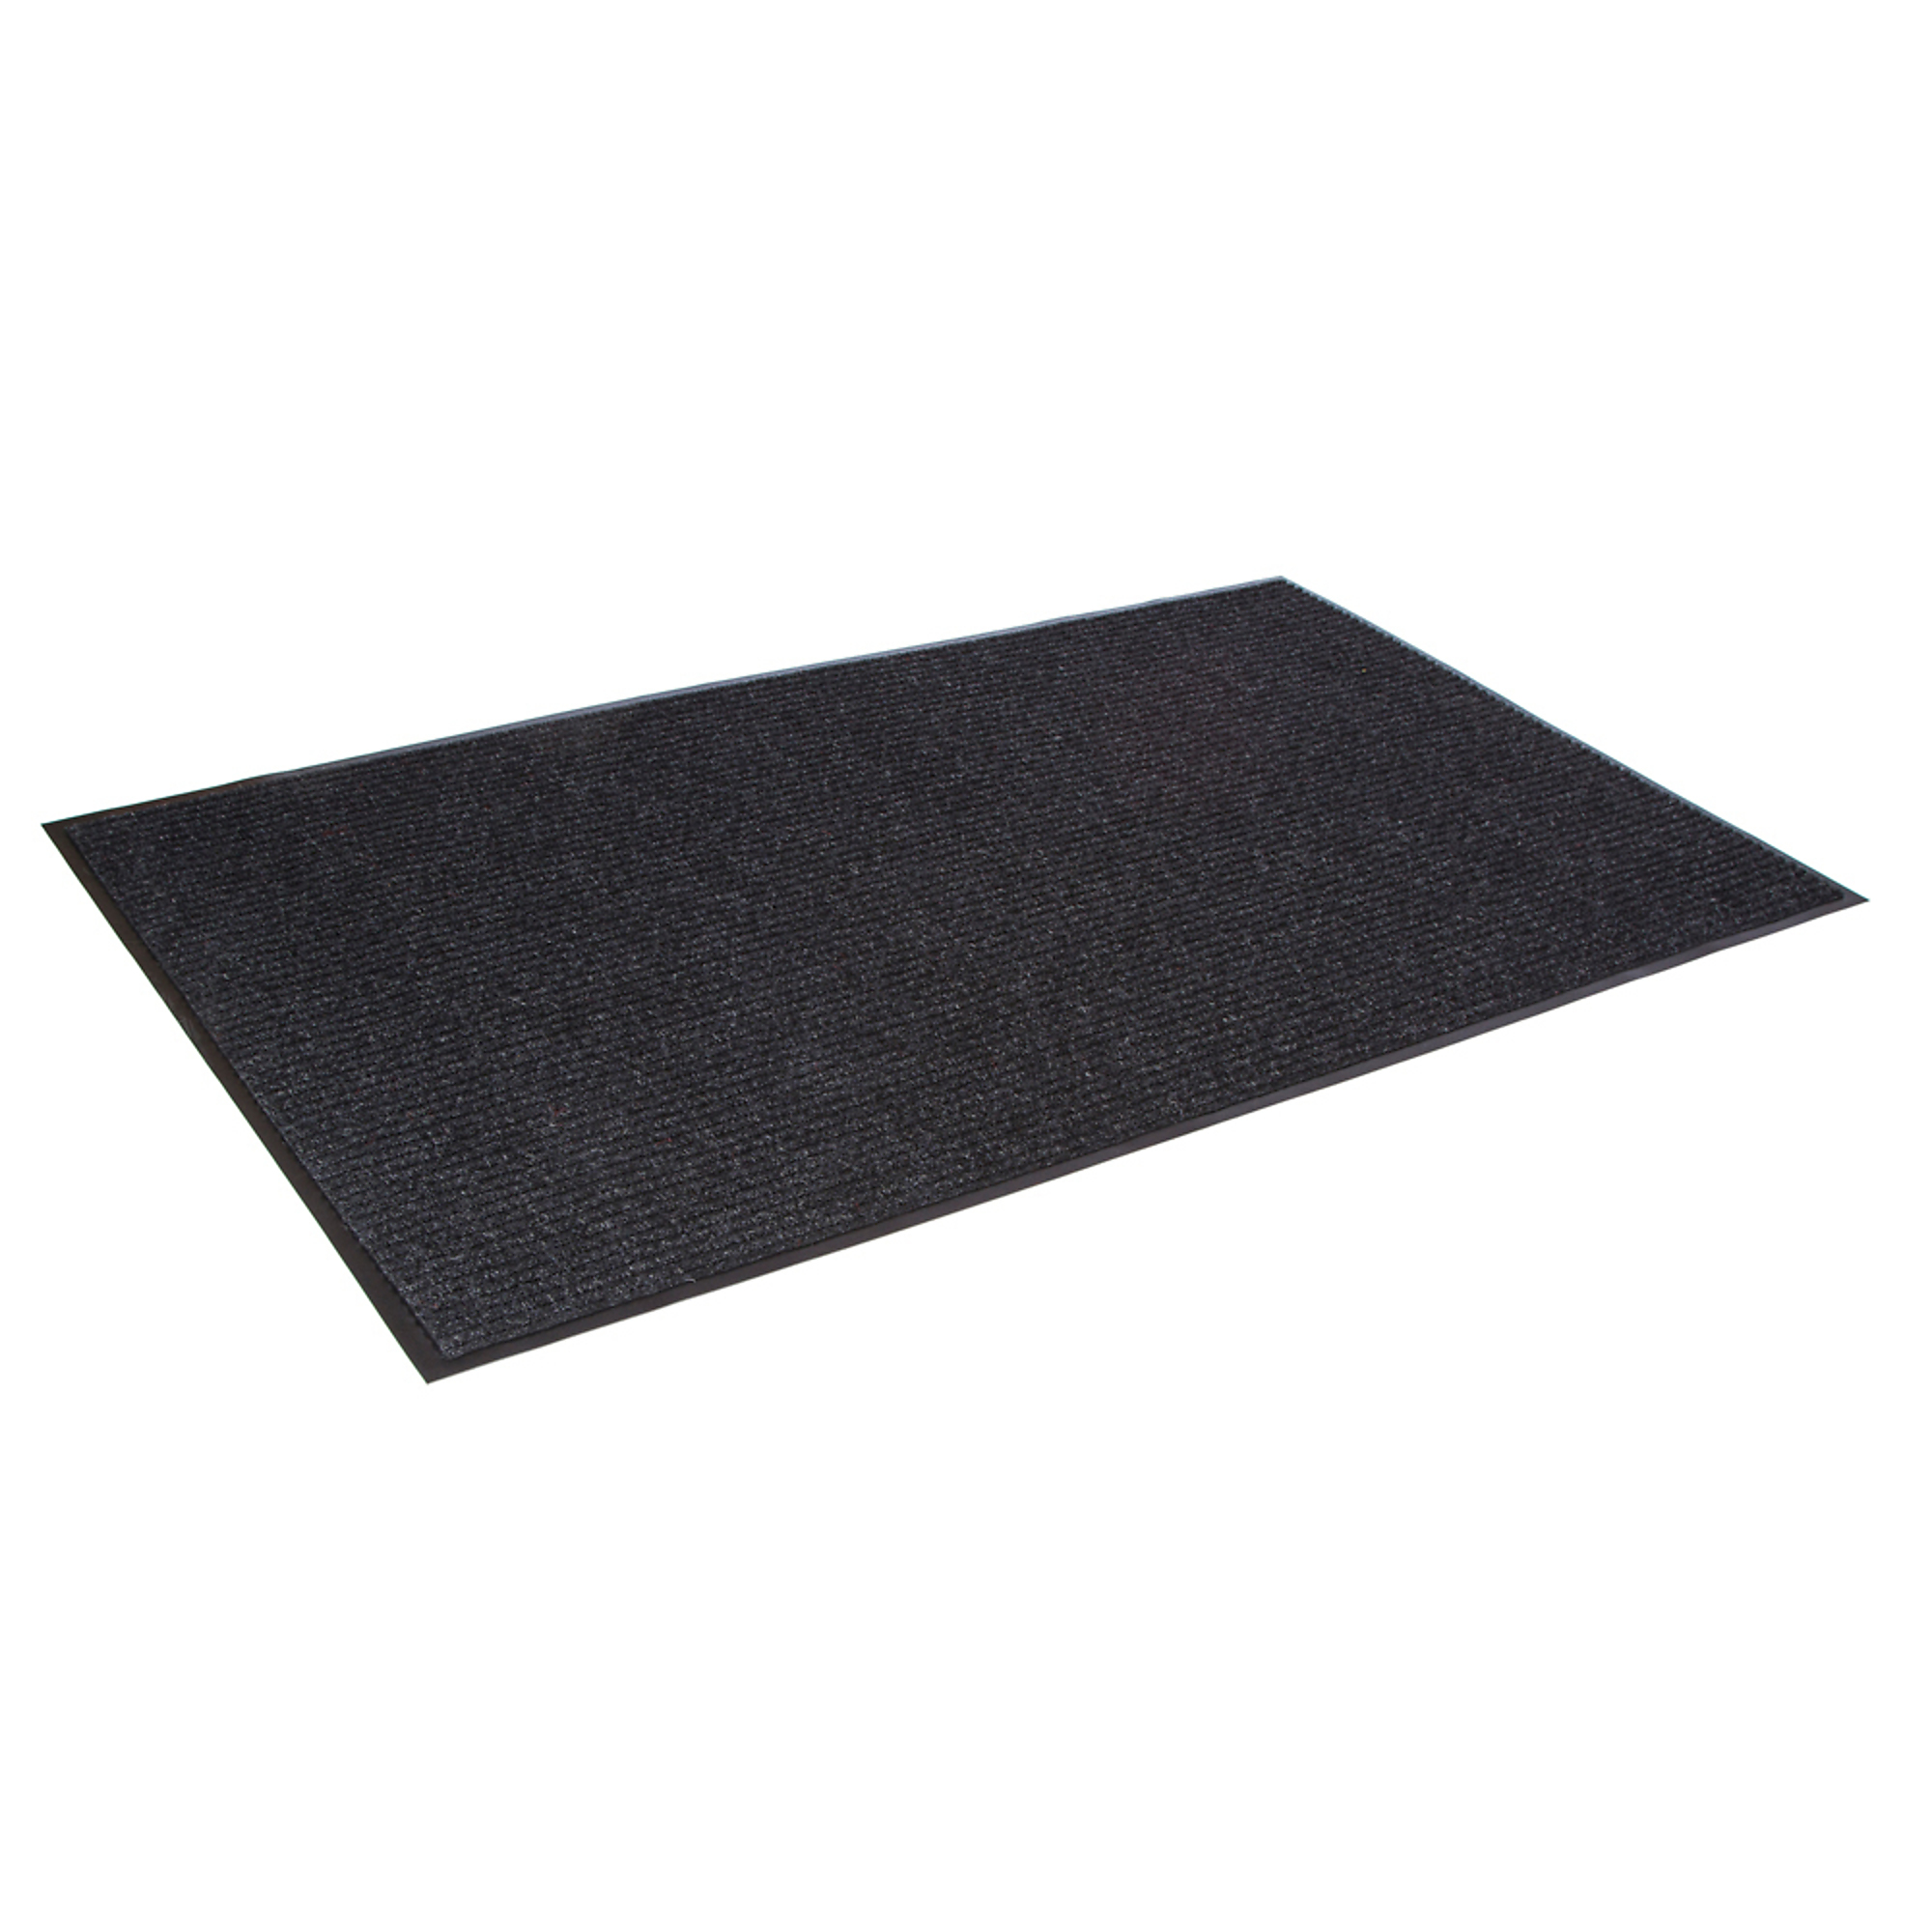 Crown Matting Technologies, Needle-Rib 2ft.x3ft. Charcoal, Width 24 in, Length 36 in, Thickness 5/16 in, Model NR 0023CH